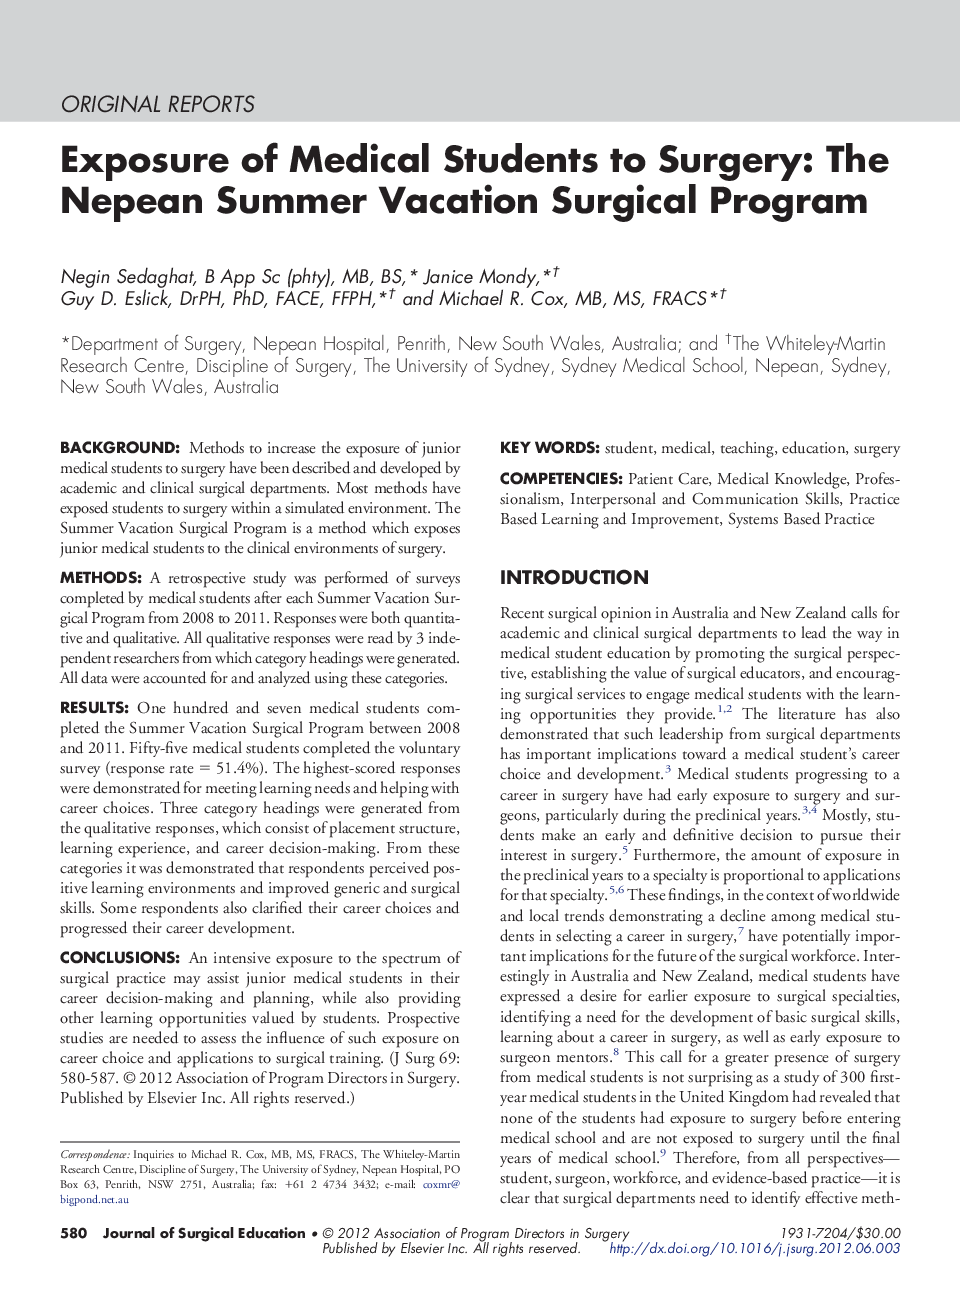 Exposure of Medical Students to Surgery: The Nepean Summer Vacation Surgical Program